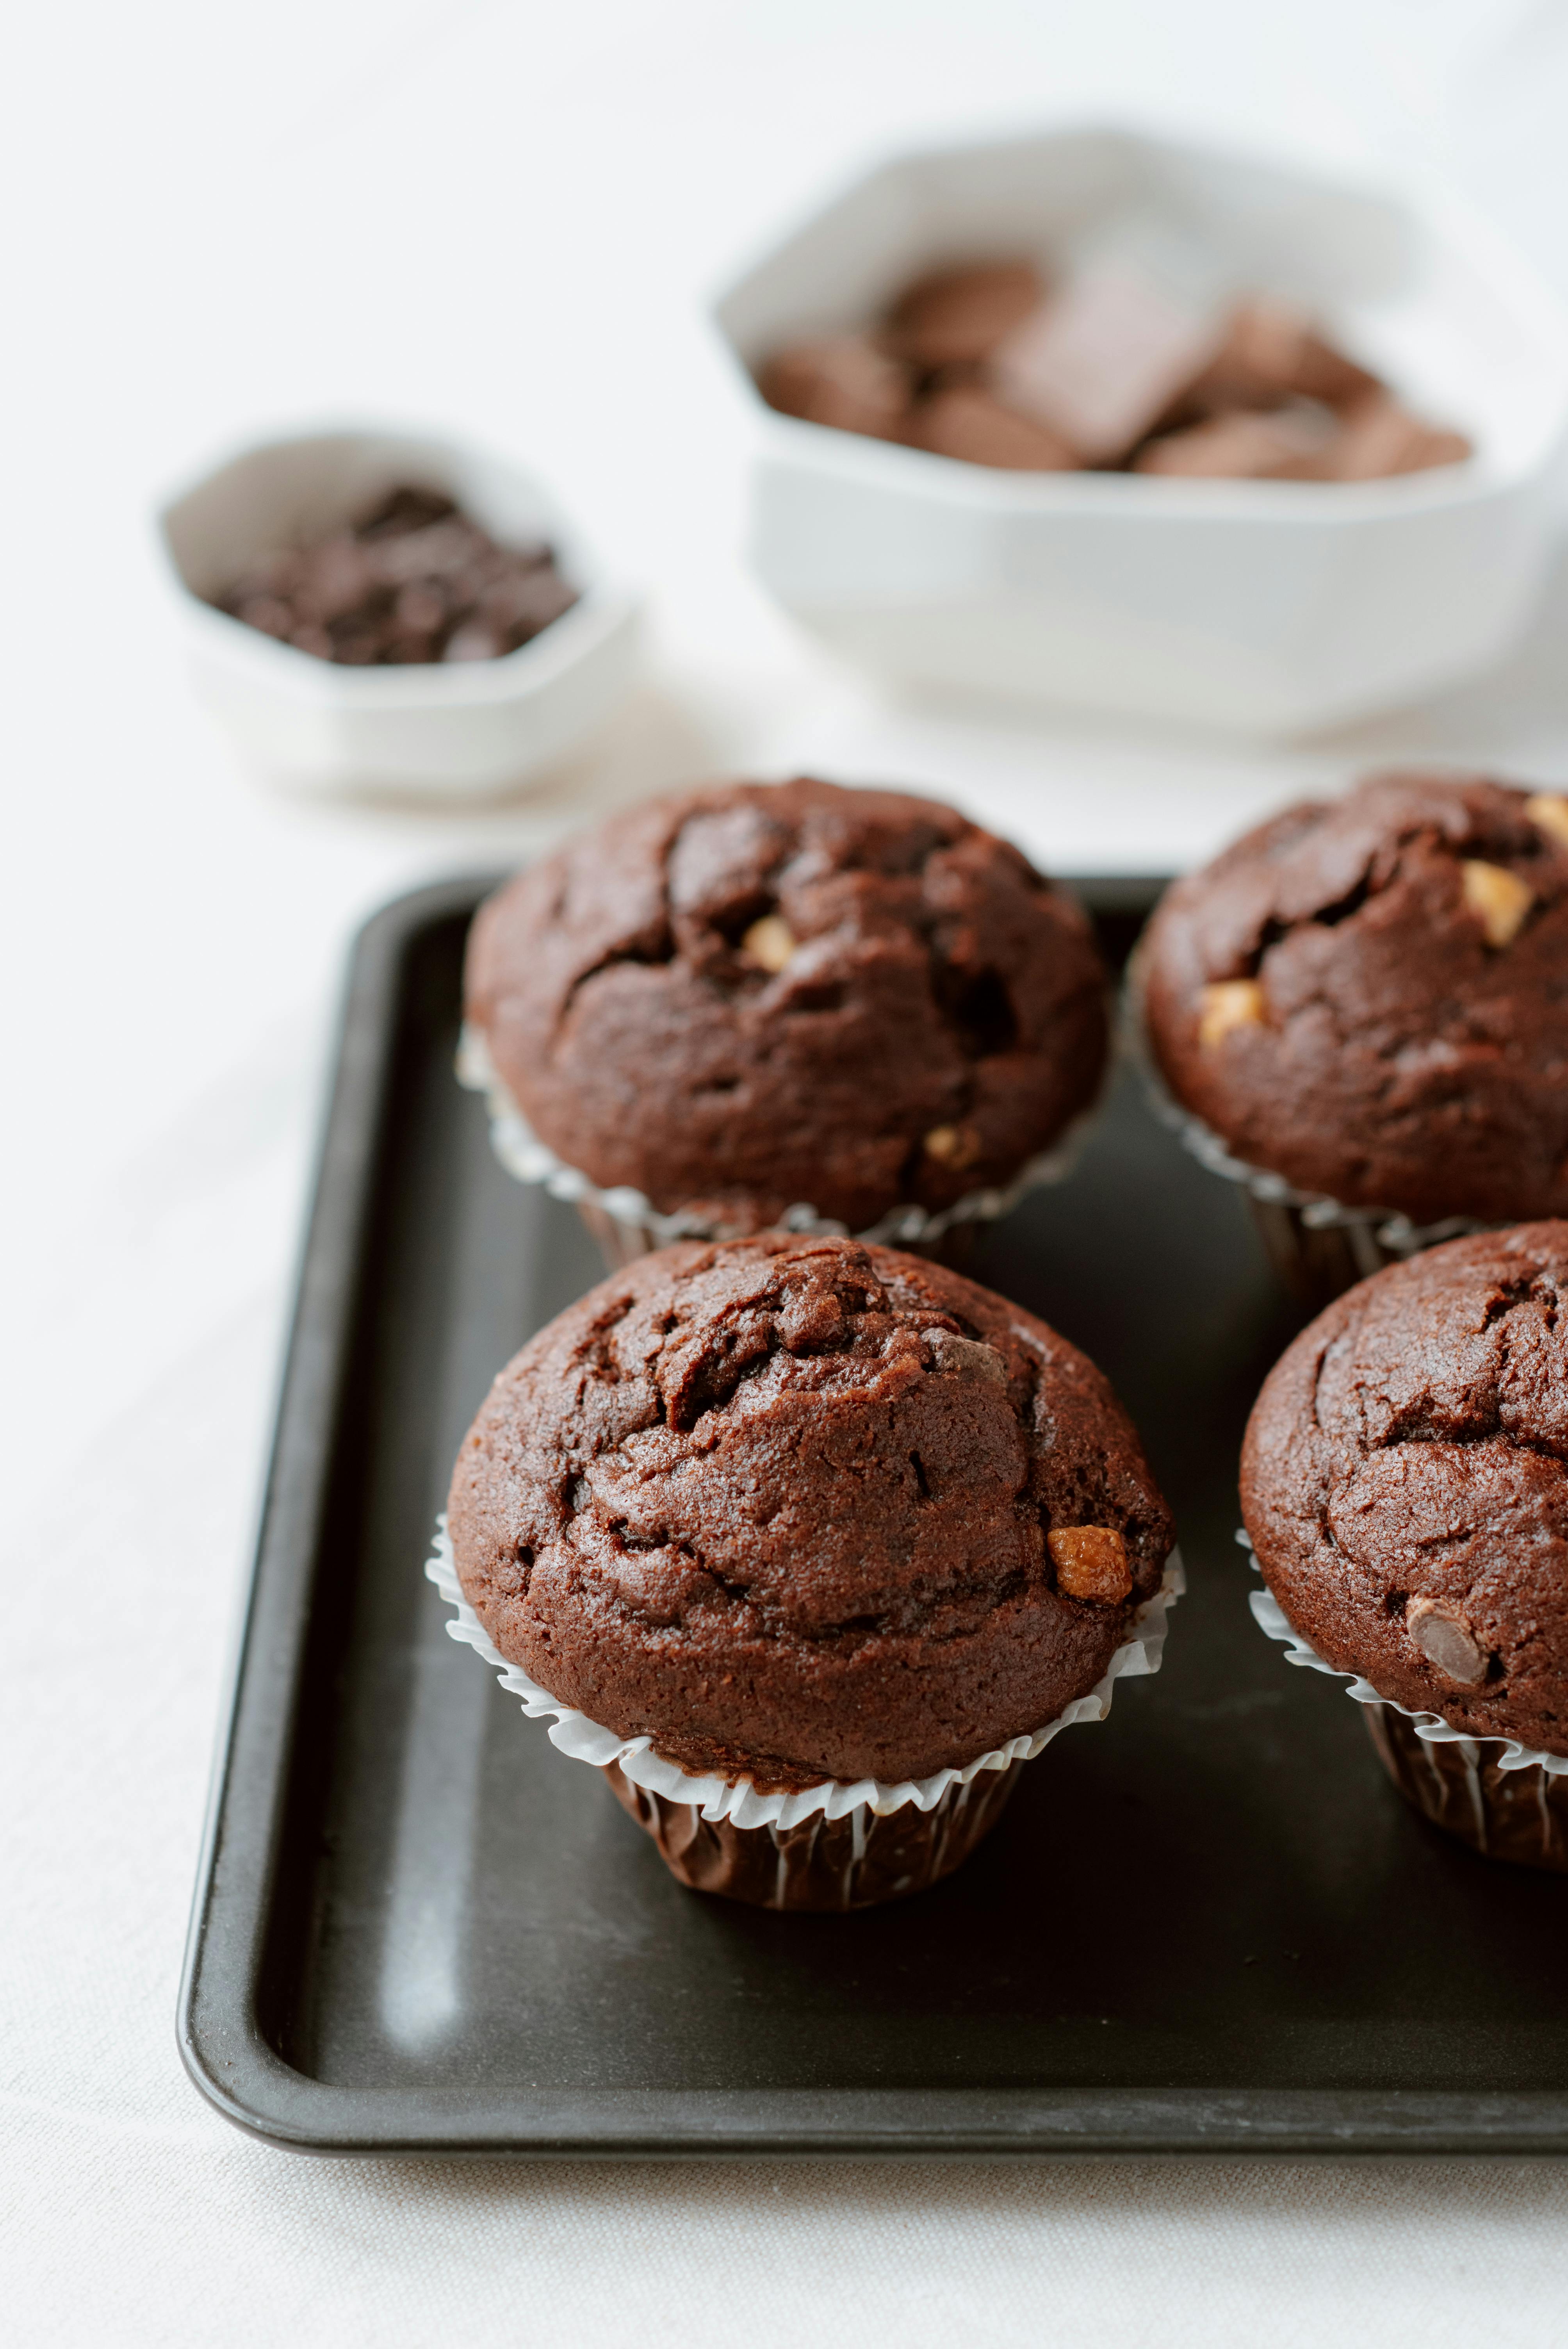 Chocolate muffins made of batter and dough · Free Stock Photo